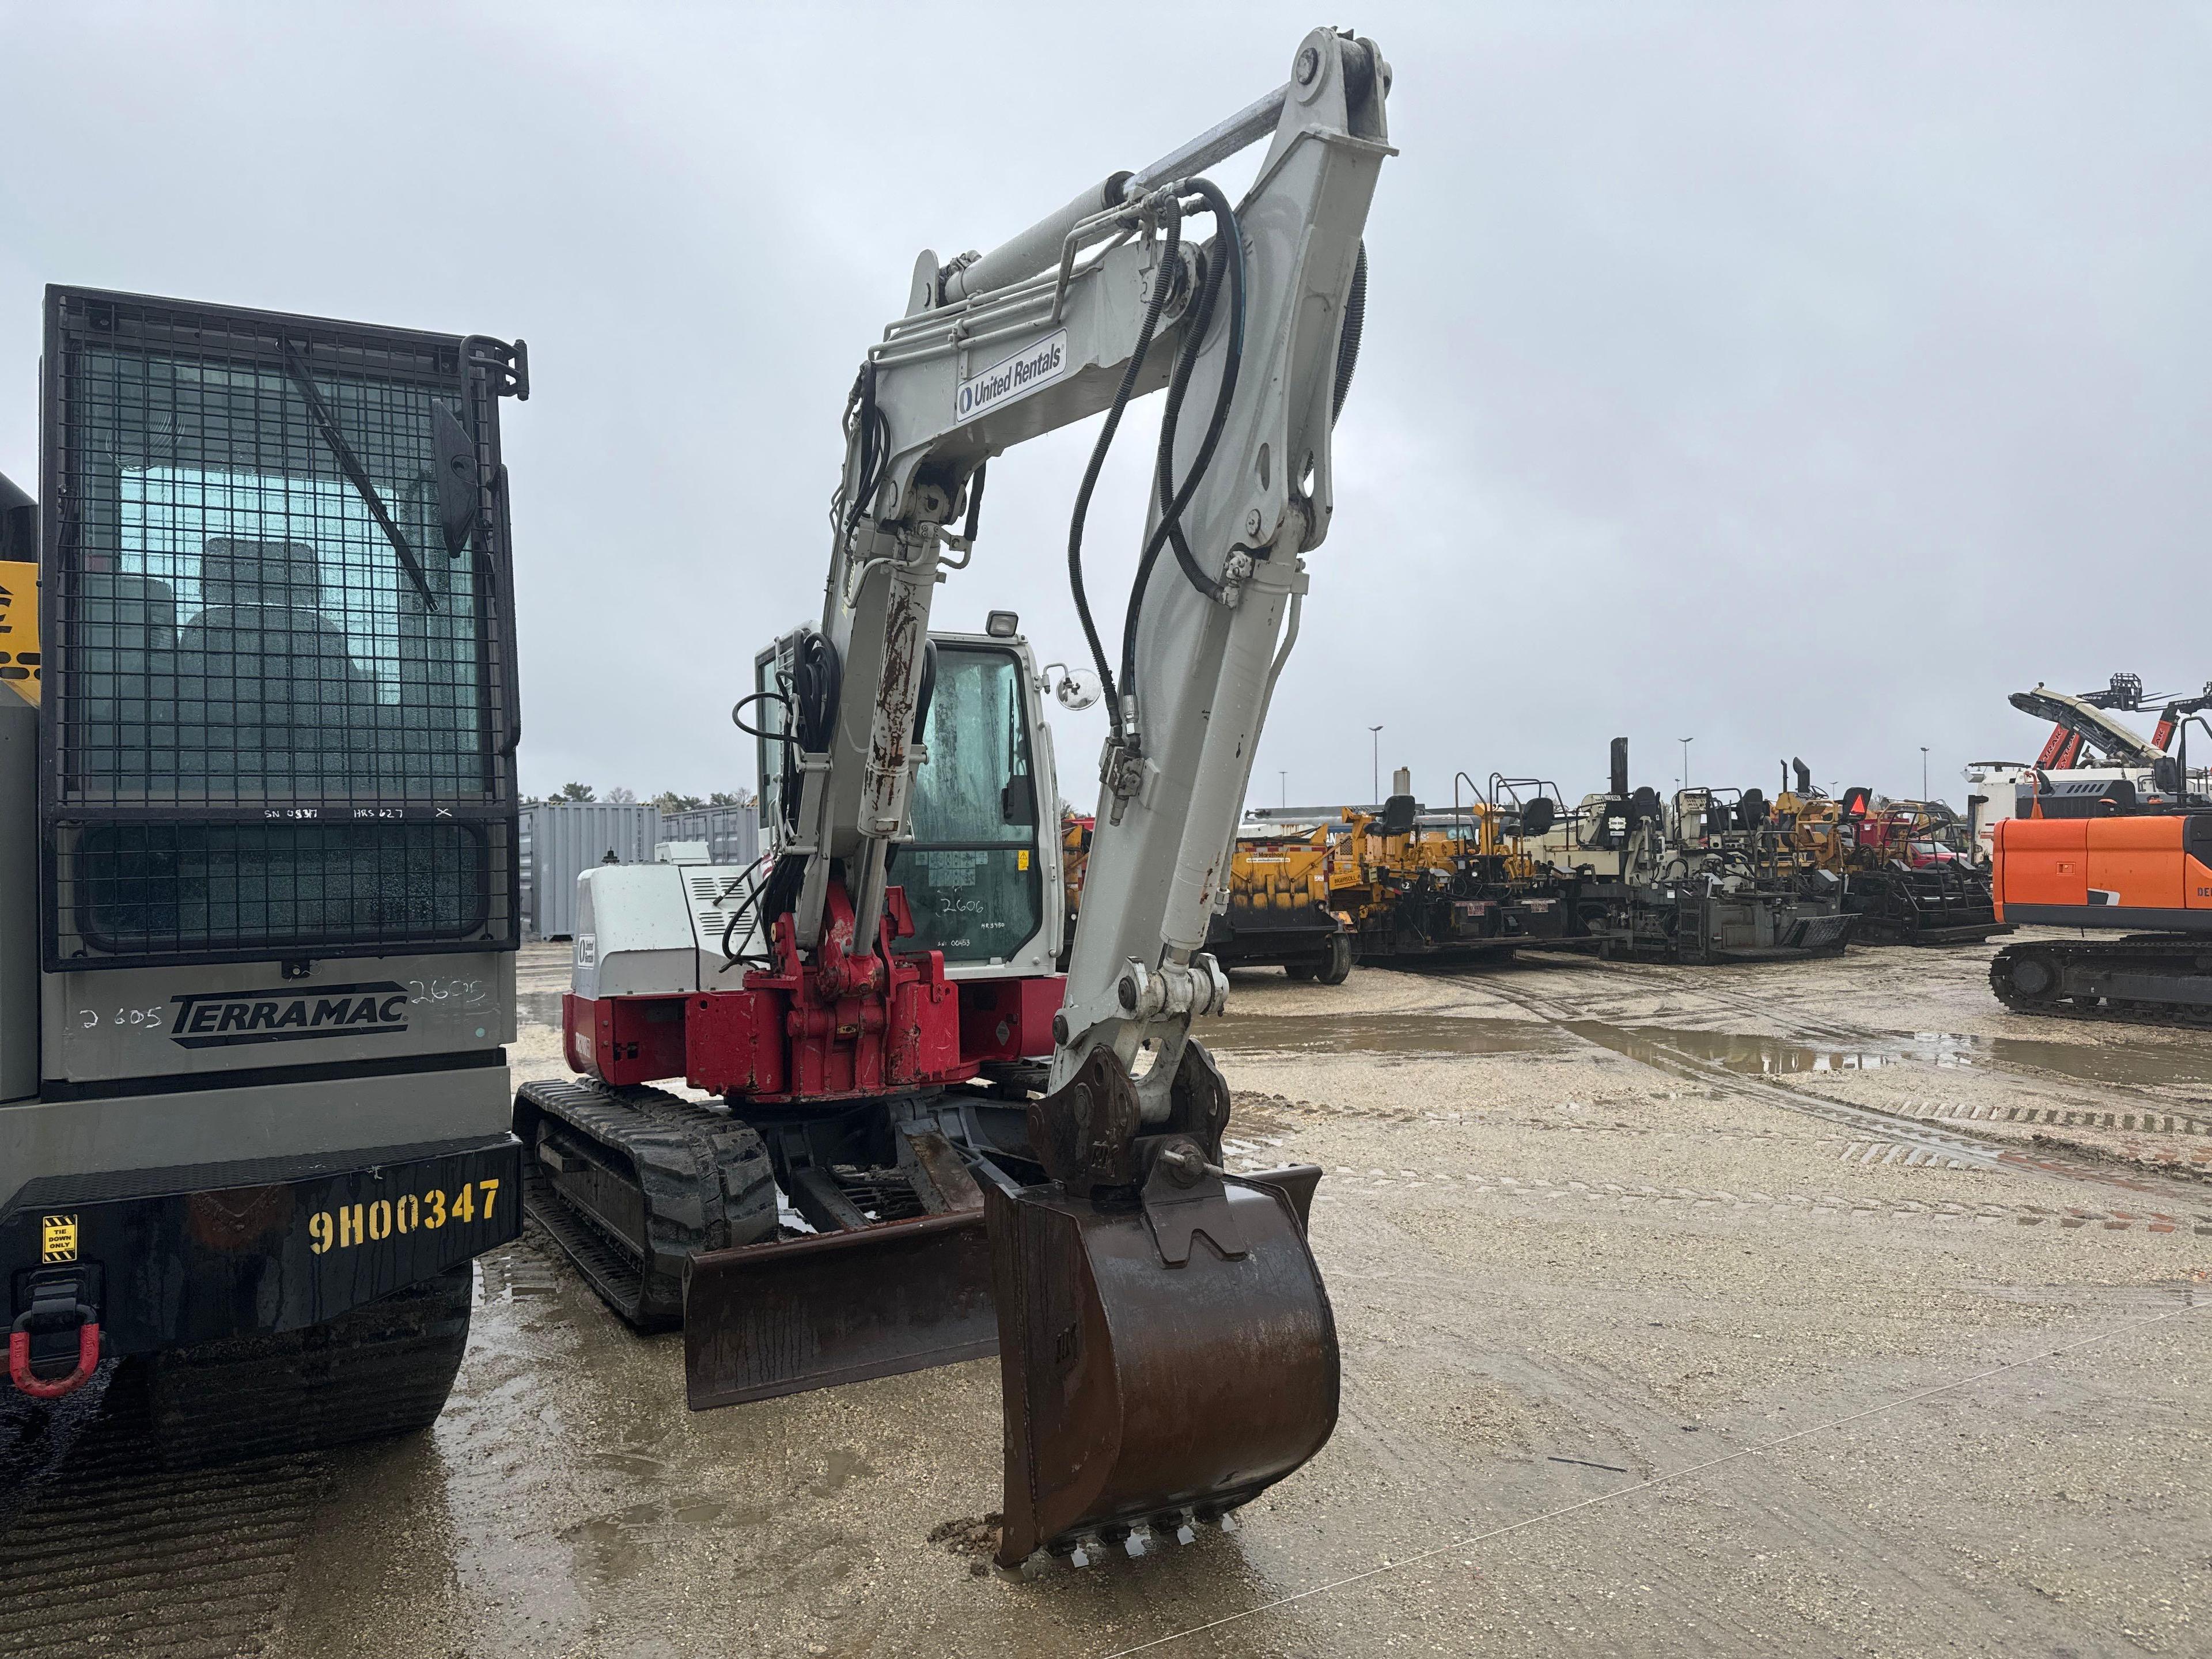 2016 TAKEUCHI TB280FR HYDRAULIC EXCAVATOR SN:178500453 powered by diesel engine, equipped with Cab,